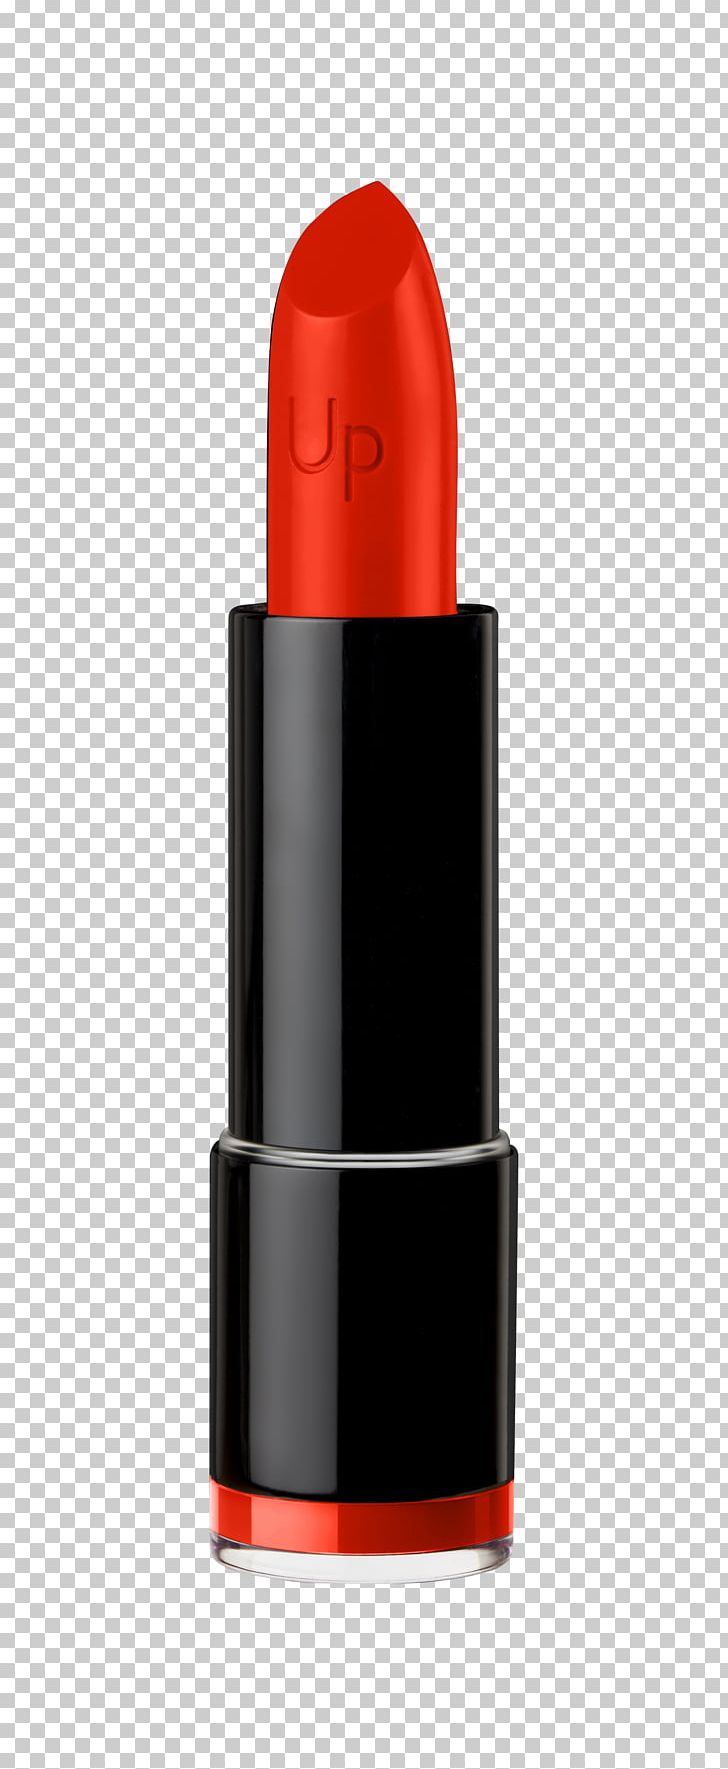 Lipstick Red Make-up Black|Up PNG, Clipart, Accessories, Beauty, Blackup, Color, Cosmetics Free PNG Download